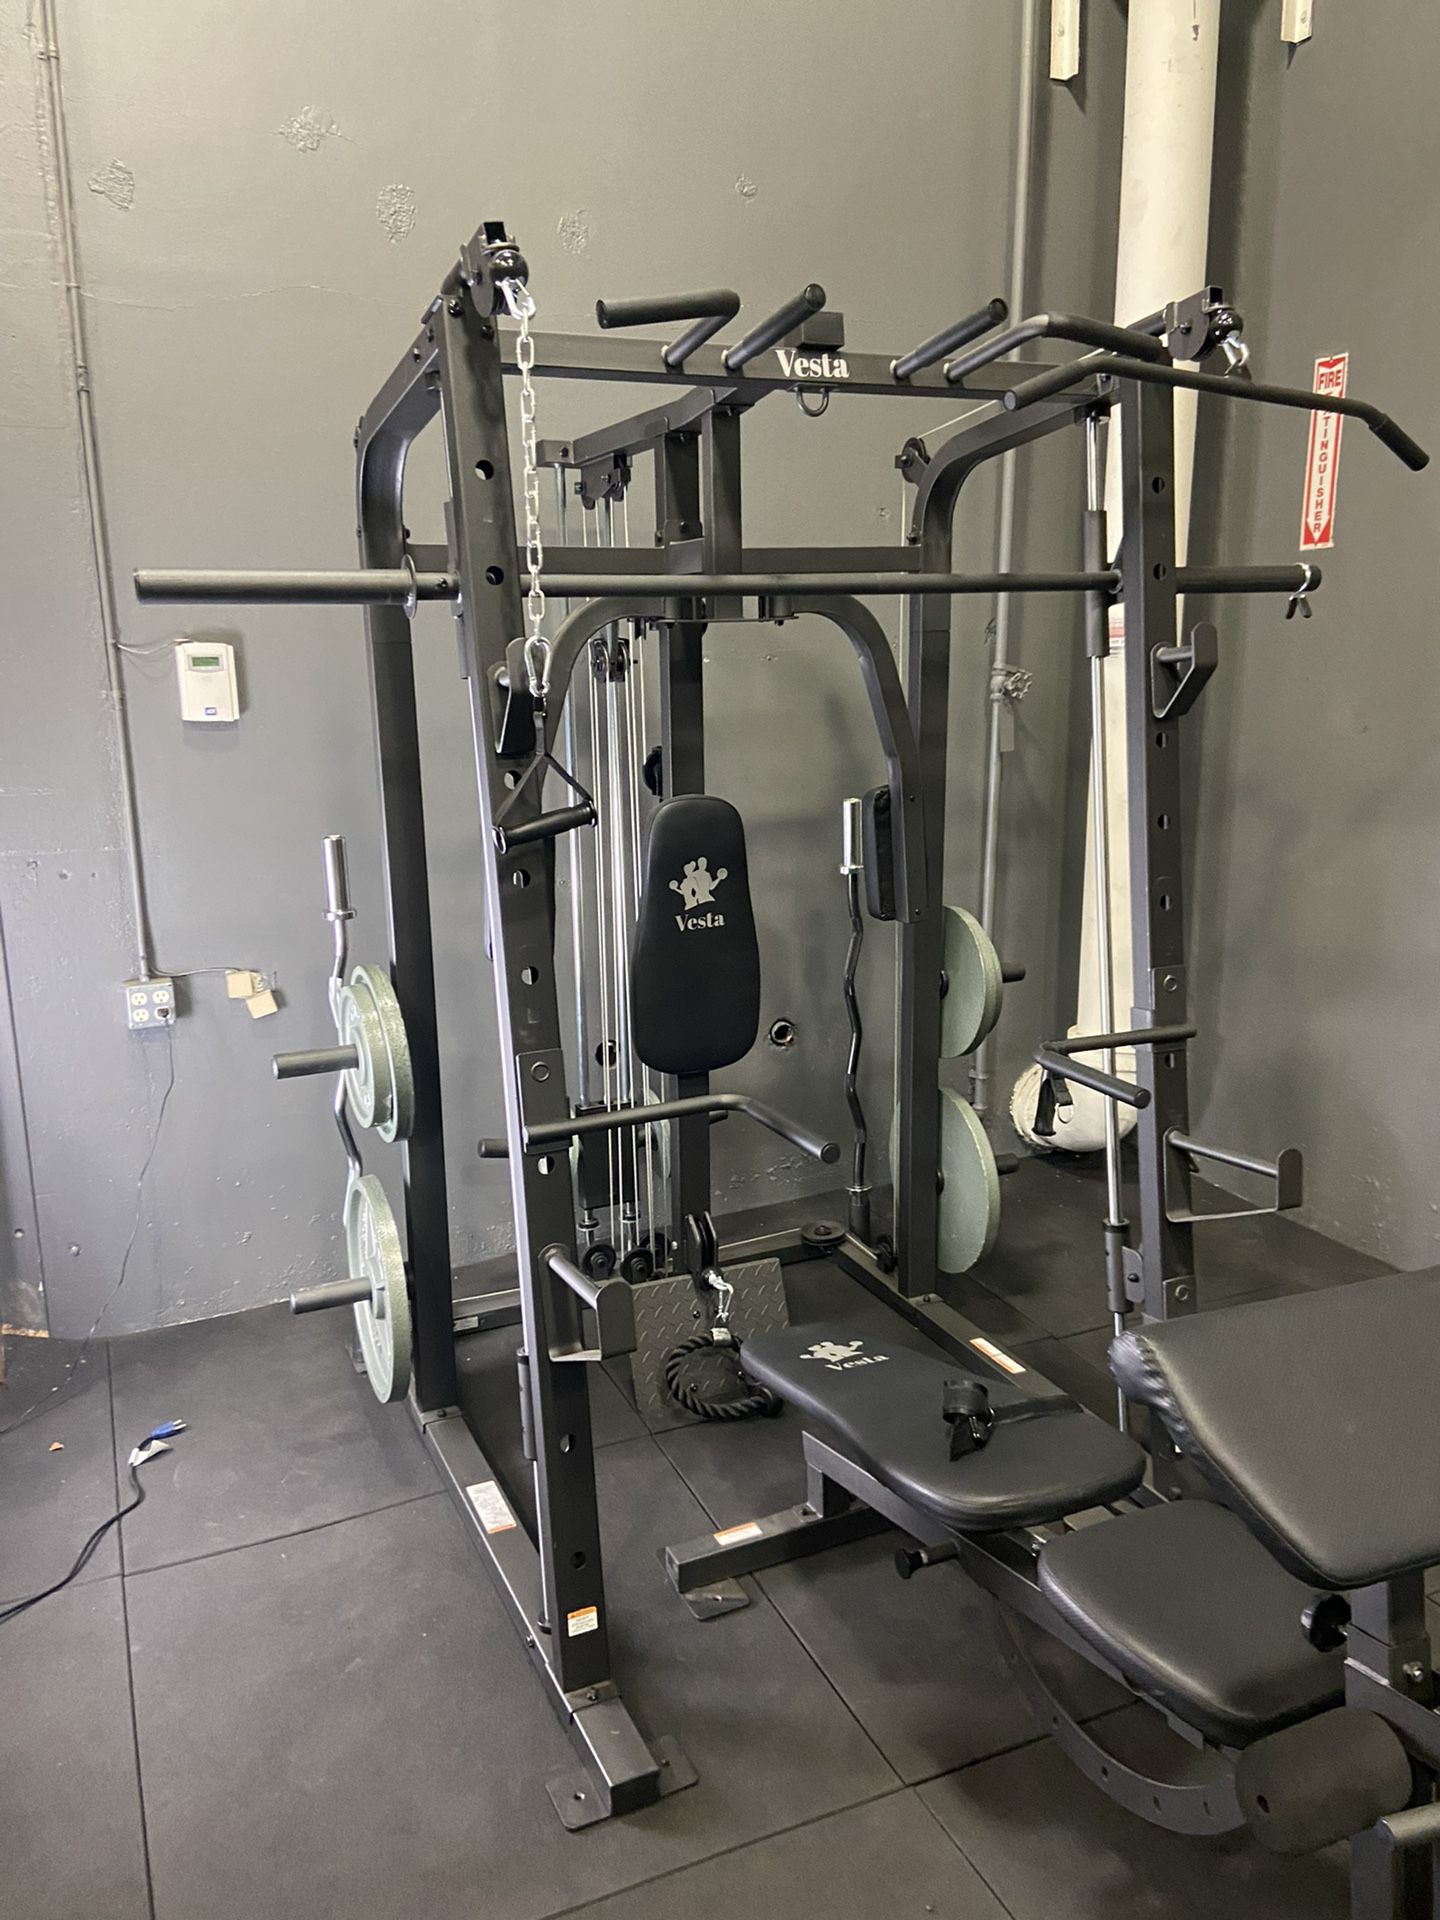 SMITH MACHINE/ PULLEY SYSTEM/ SQUAT RACK/ BENCH/ WEIGHTS/ BARBELL/ GYM EQUIPMENT/ FREE DELIVERY 🚚 